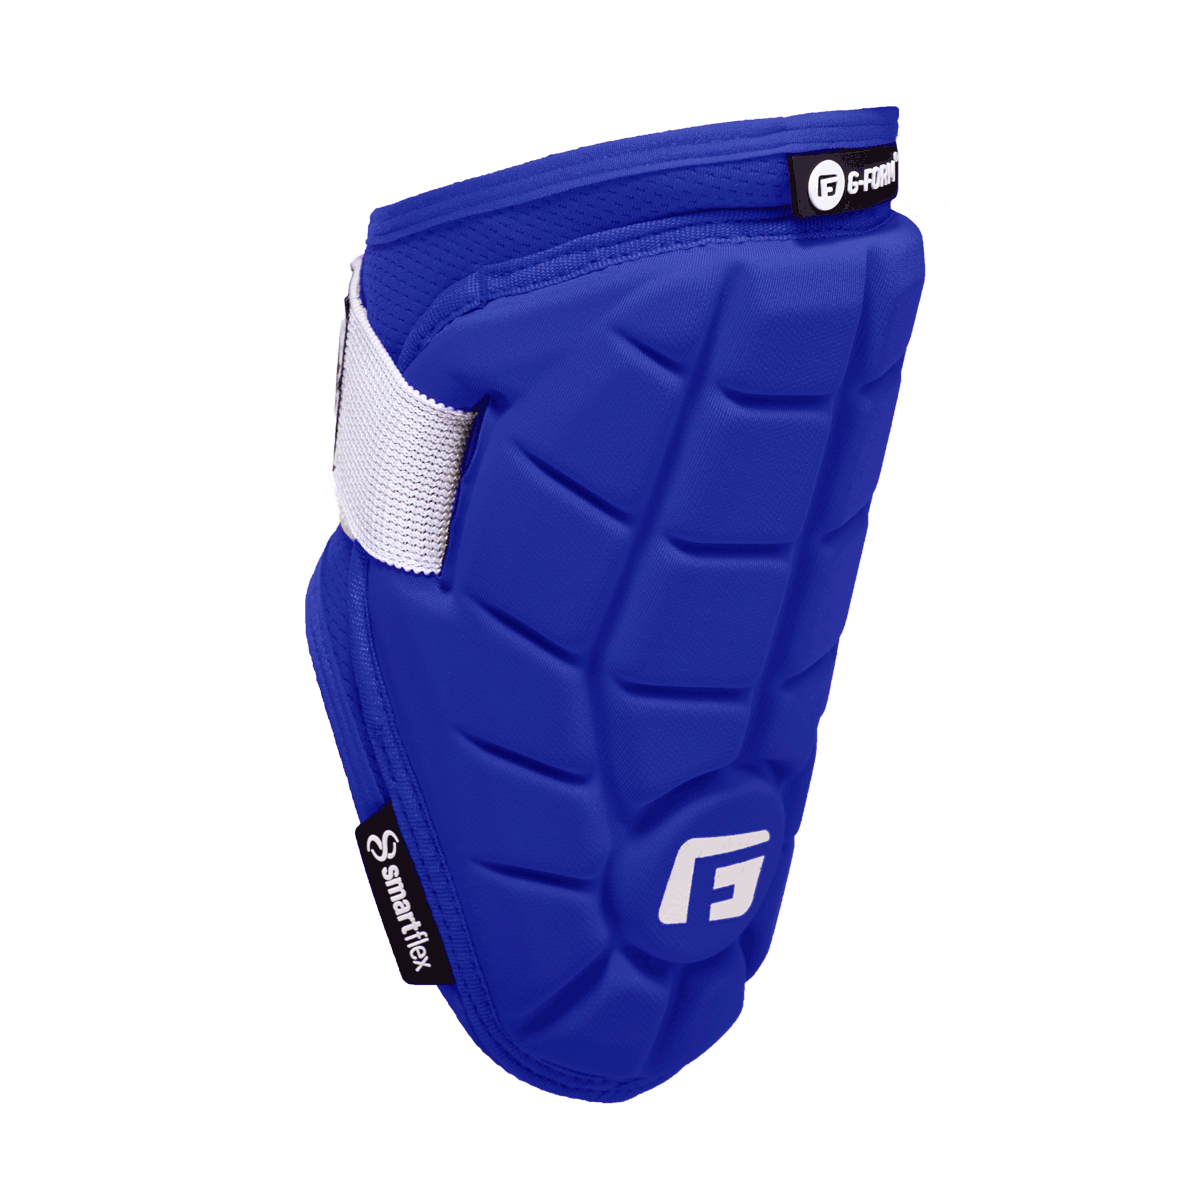 G-Form – Leightweight Knee & Elbow Guards & other Protective Gear